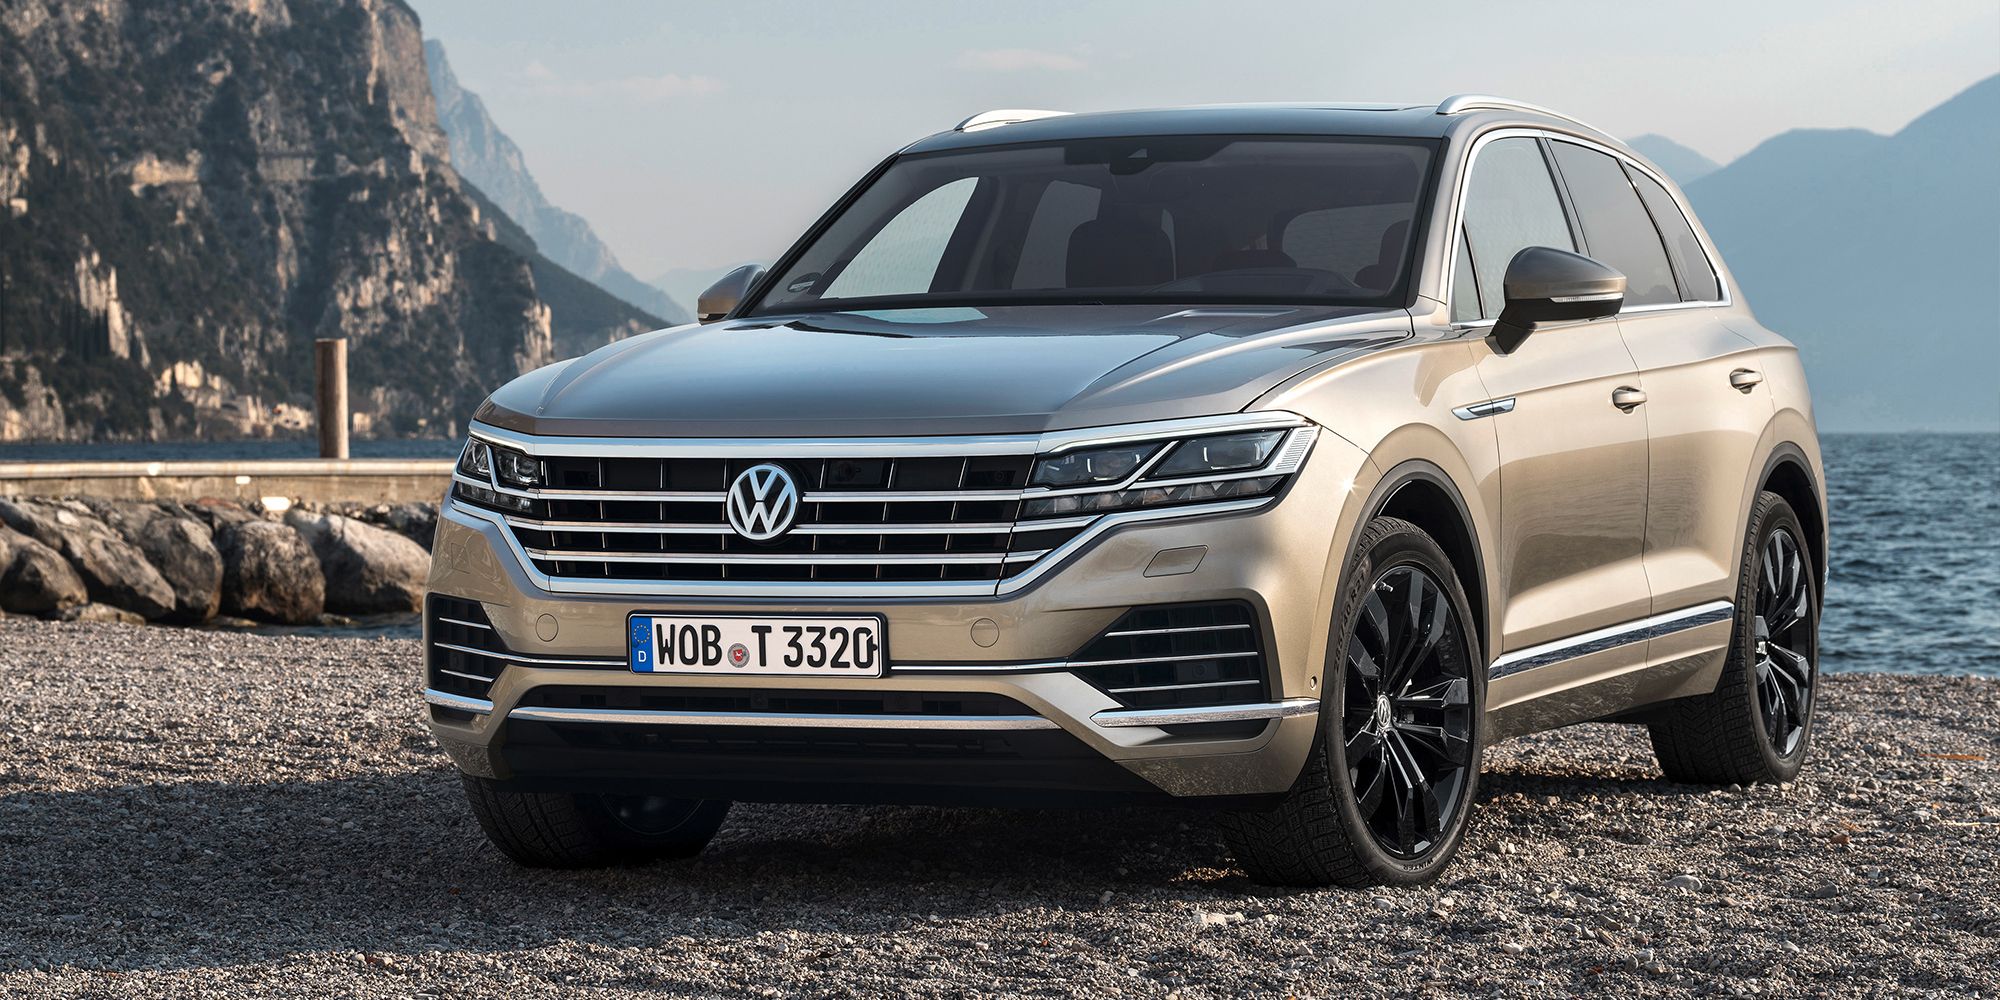 The front of the third generation VW Touareg